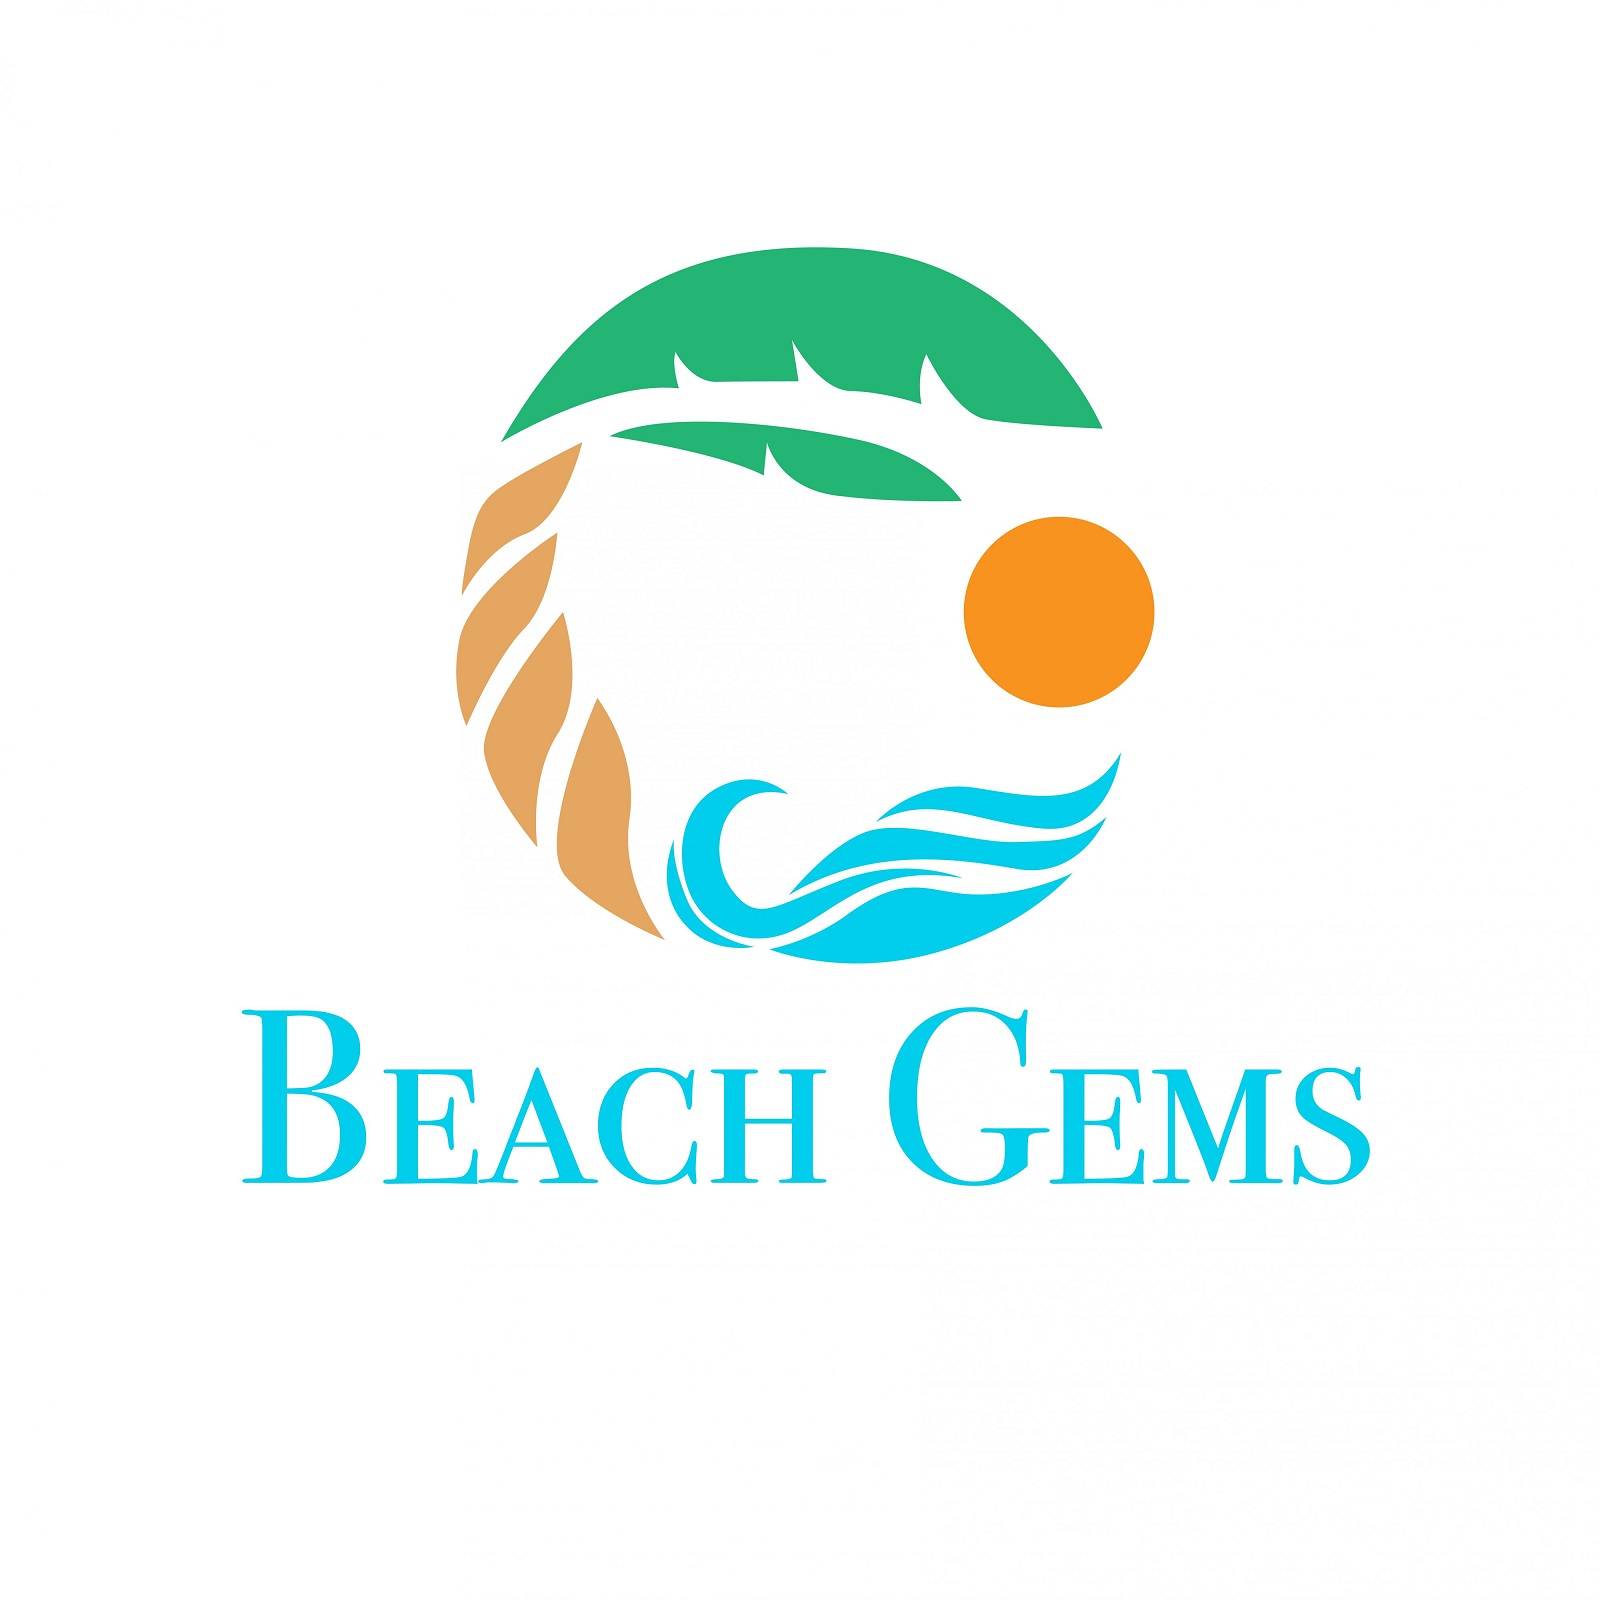 Beautiful beach logo with water layers trees and sun